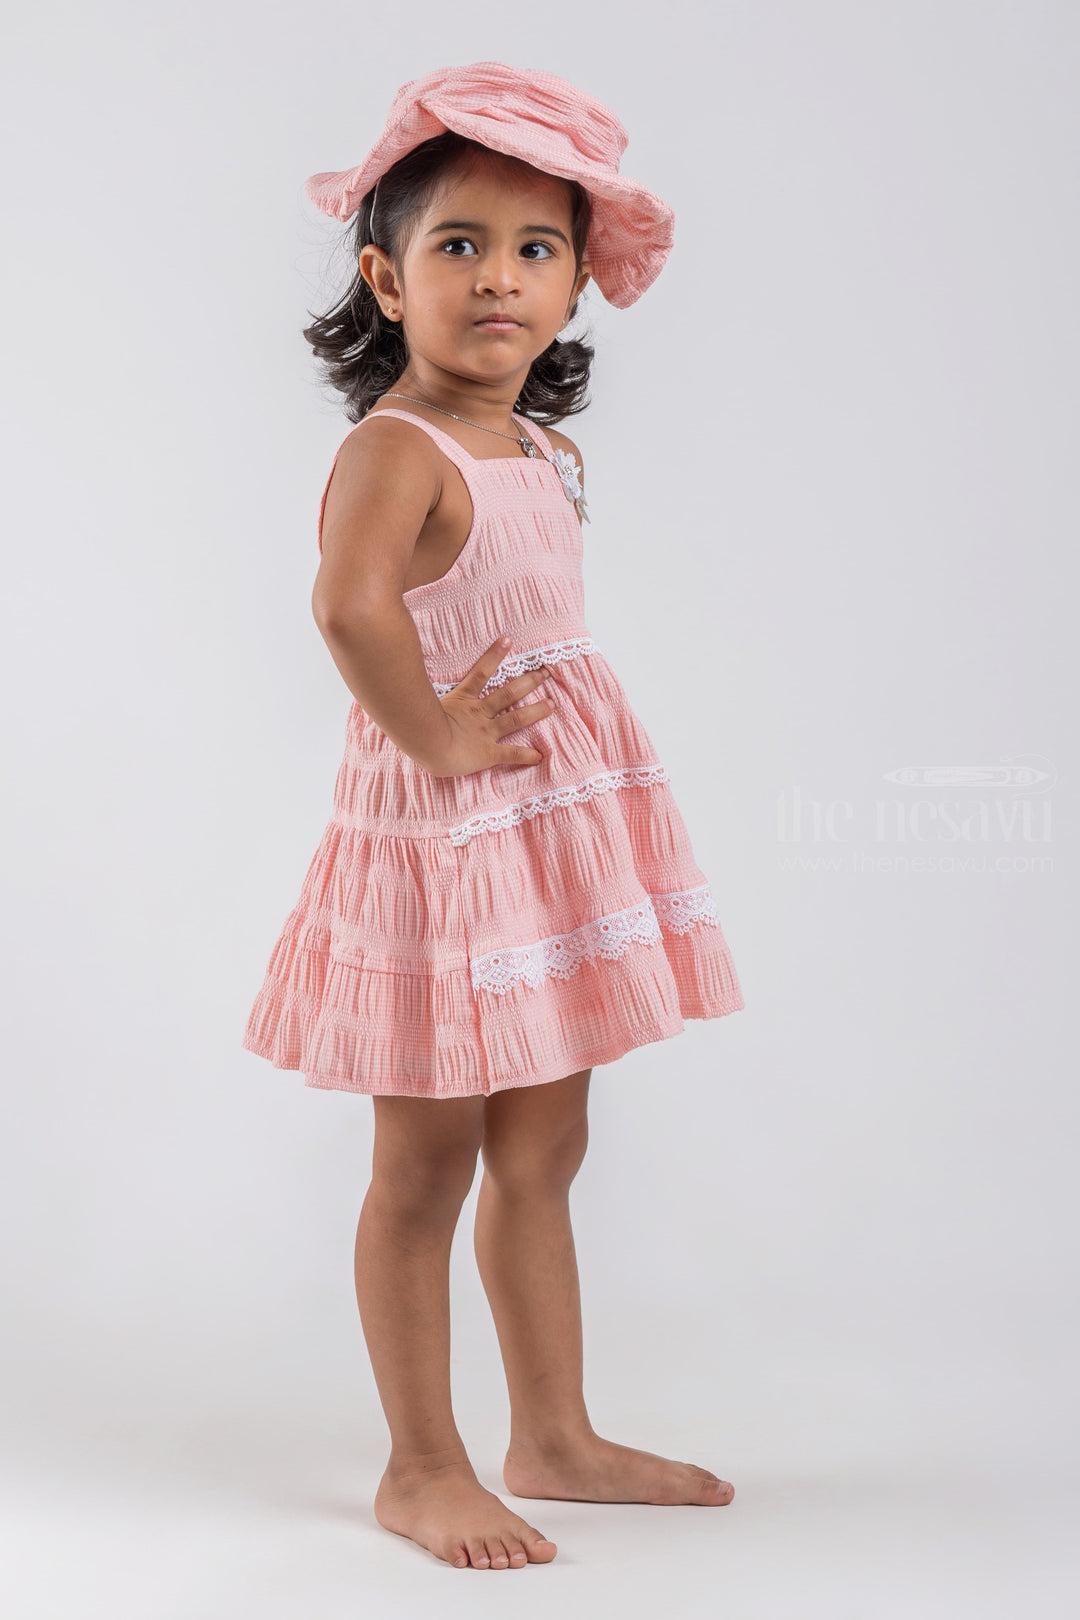 The Nesavu Baby Cotton Frocks Salmon Pink Sleeveless Layered Cotton Frock with Embellished Lace and Flower Applique for Baby Girls and Cap psr silks Nesavu